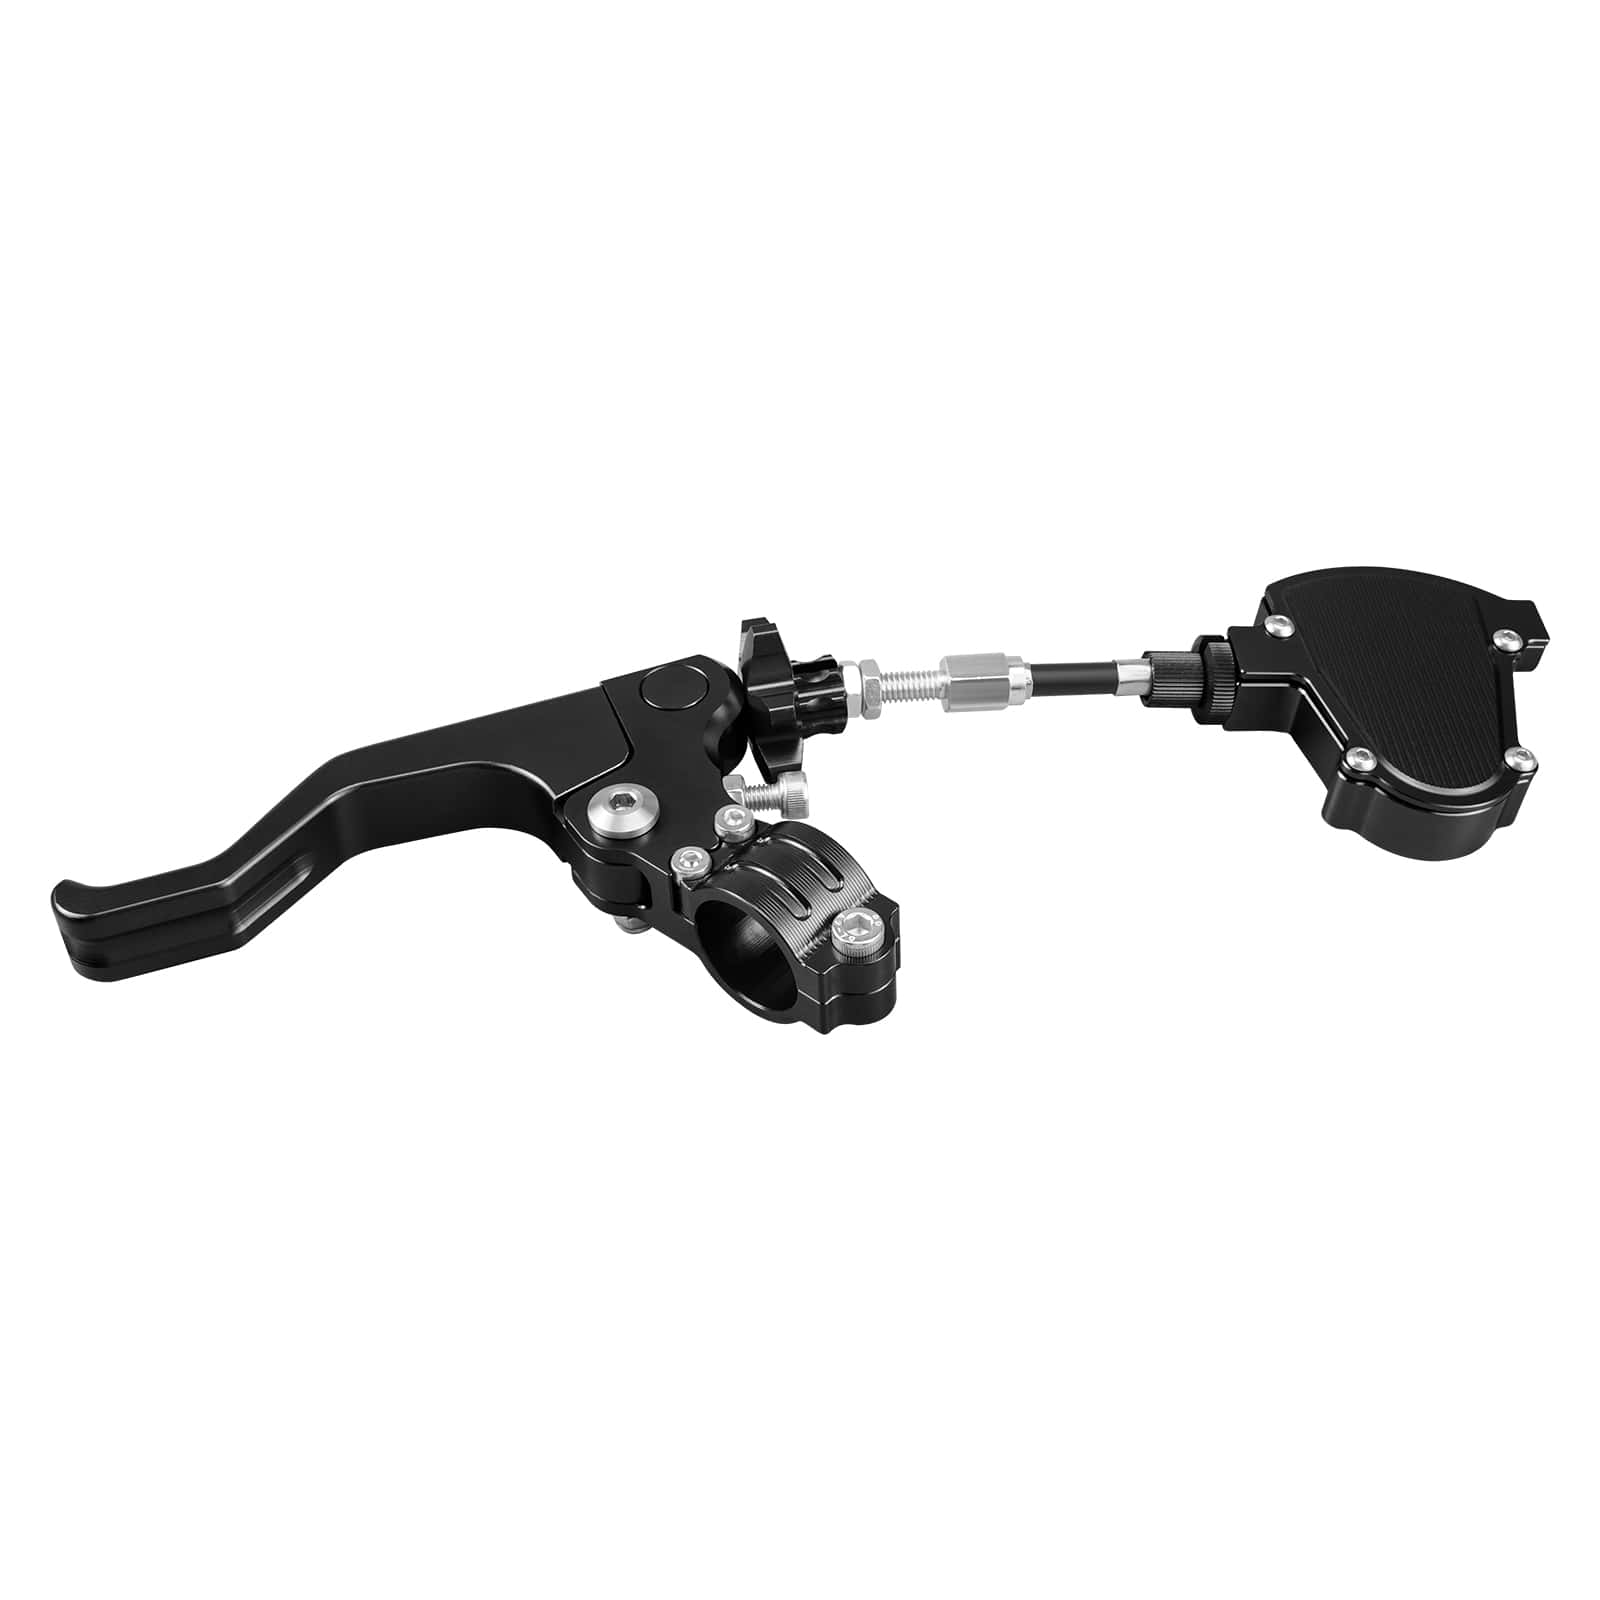 Stunt Clutch Lever Easy Pull Cable System for Dirt Bikes